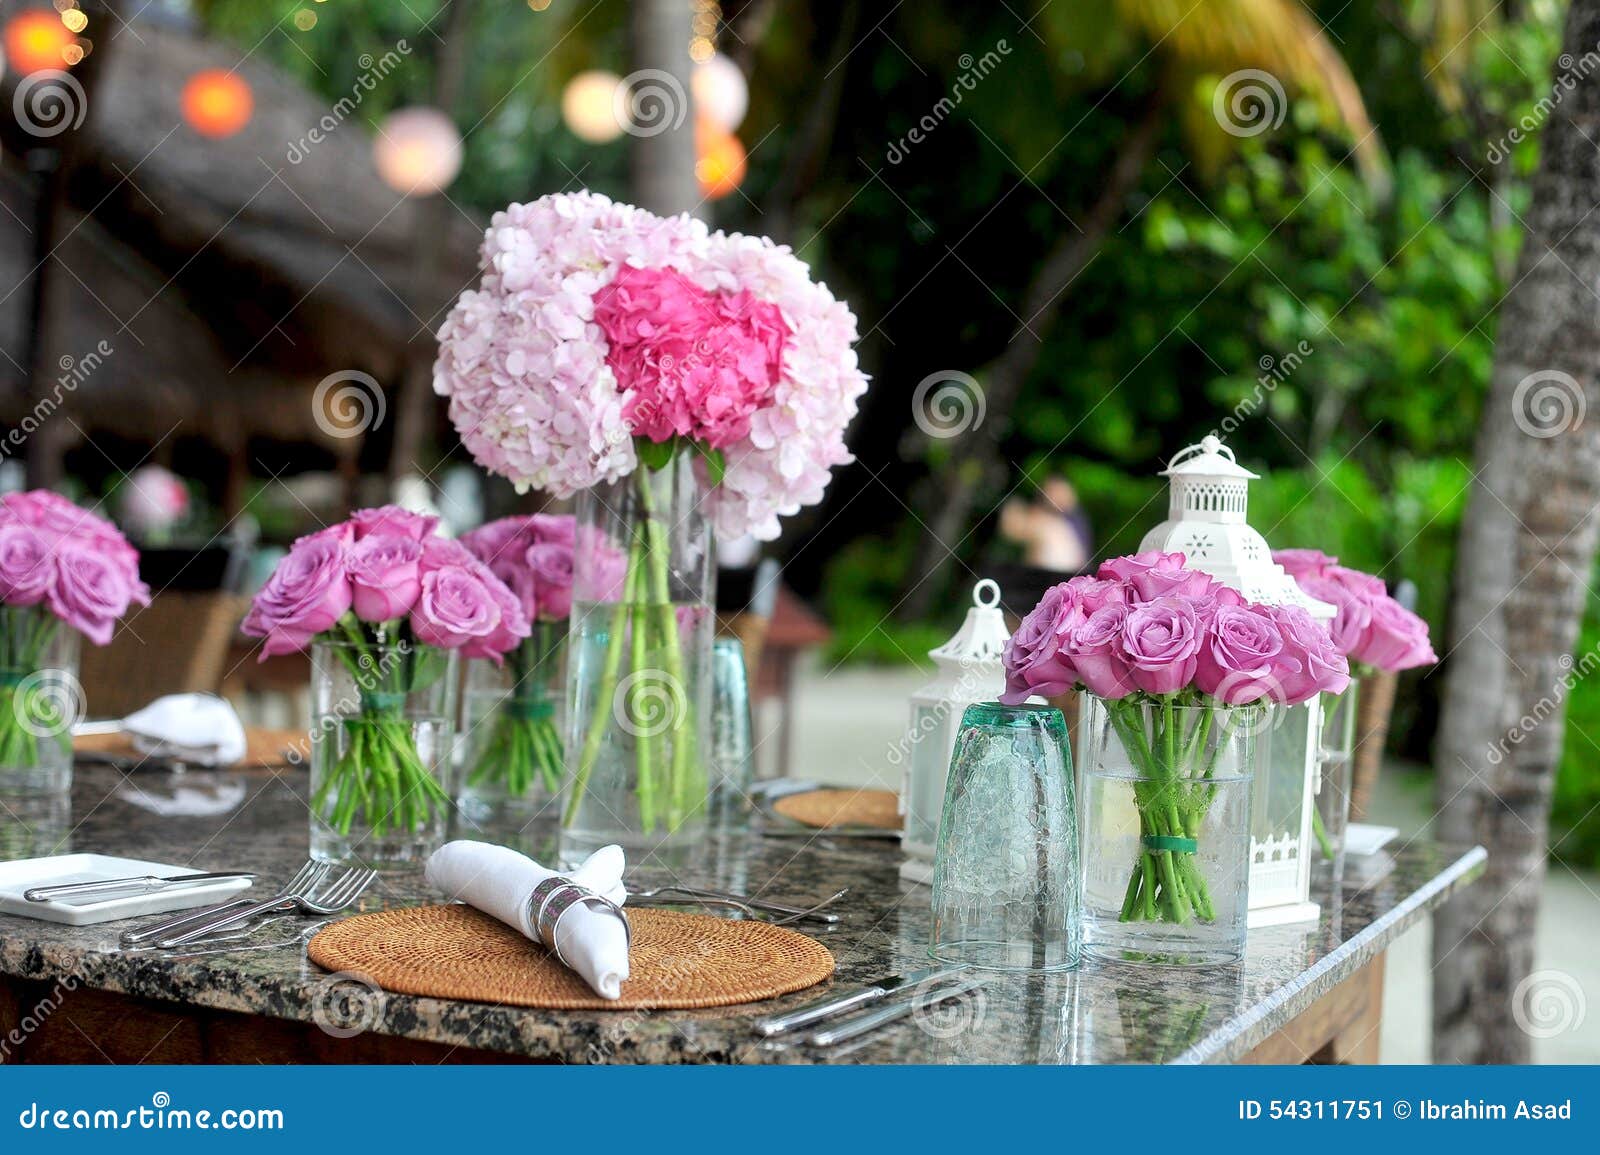 Floral Table Centerpiece Setup in Maldives Beach Stock Image